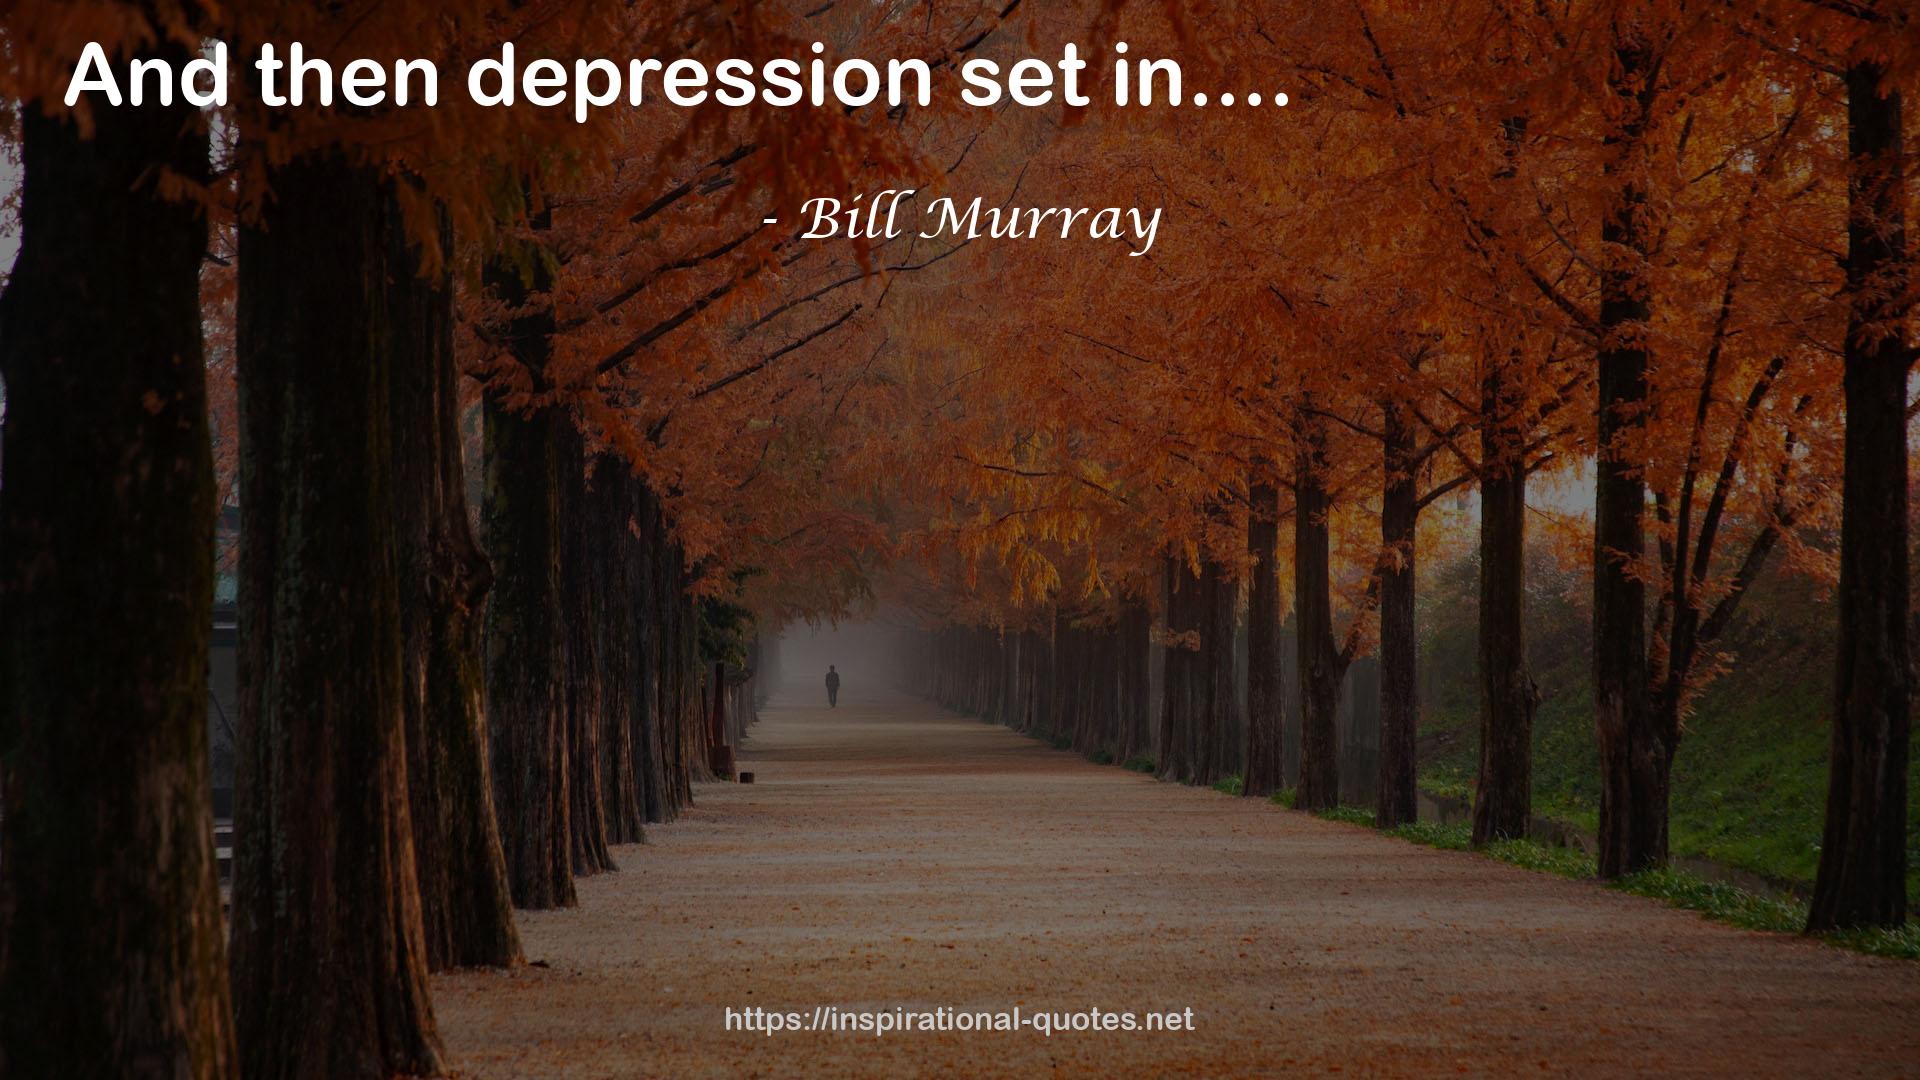 Bill Murray QUOTES